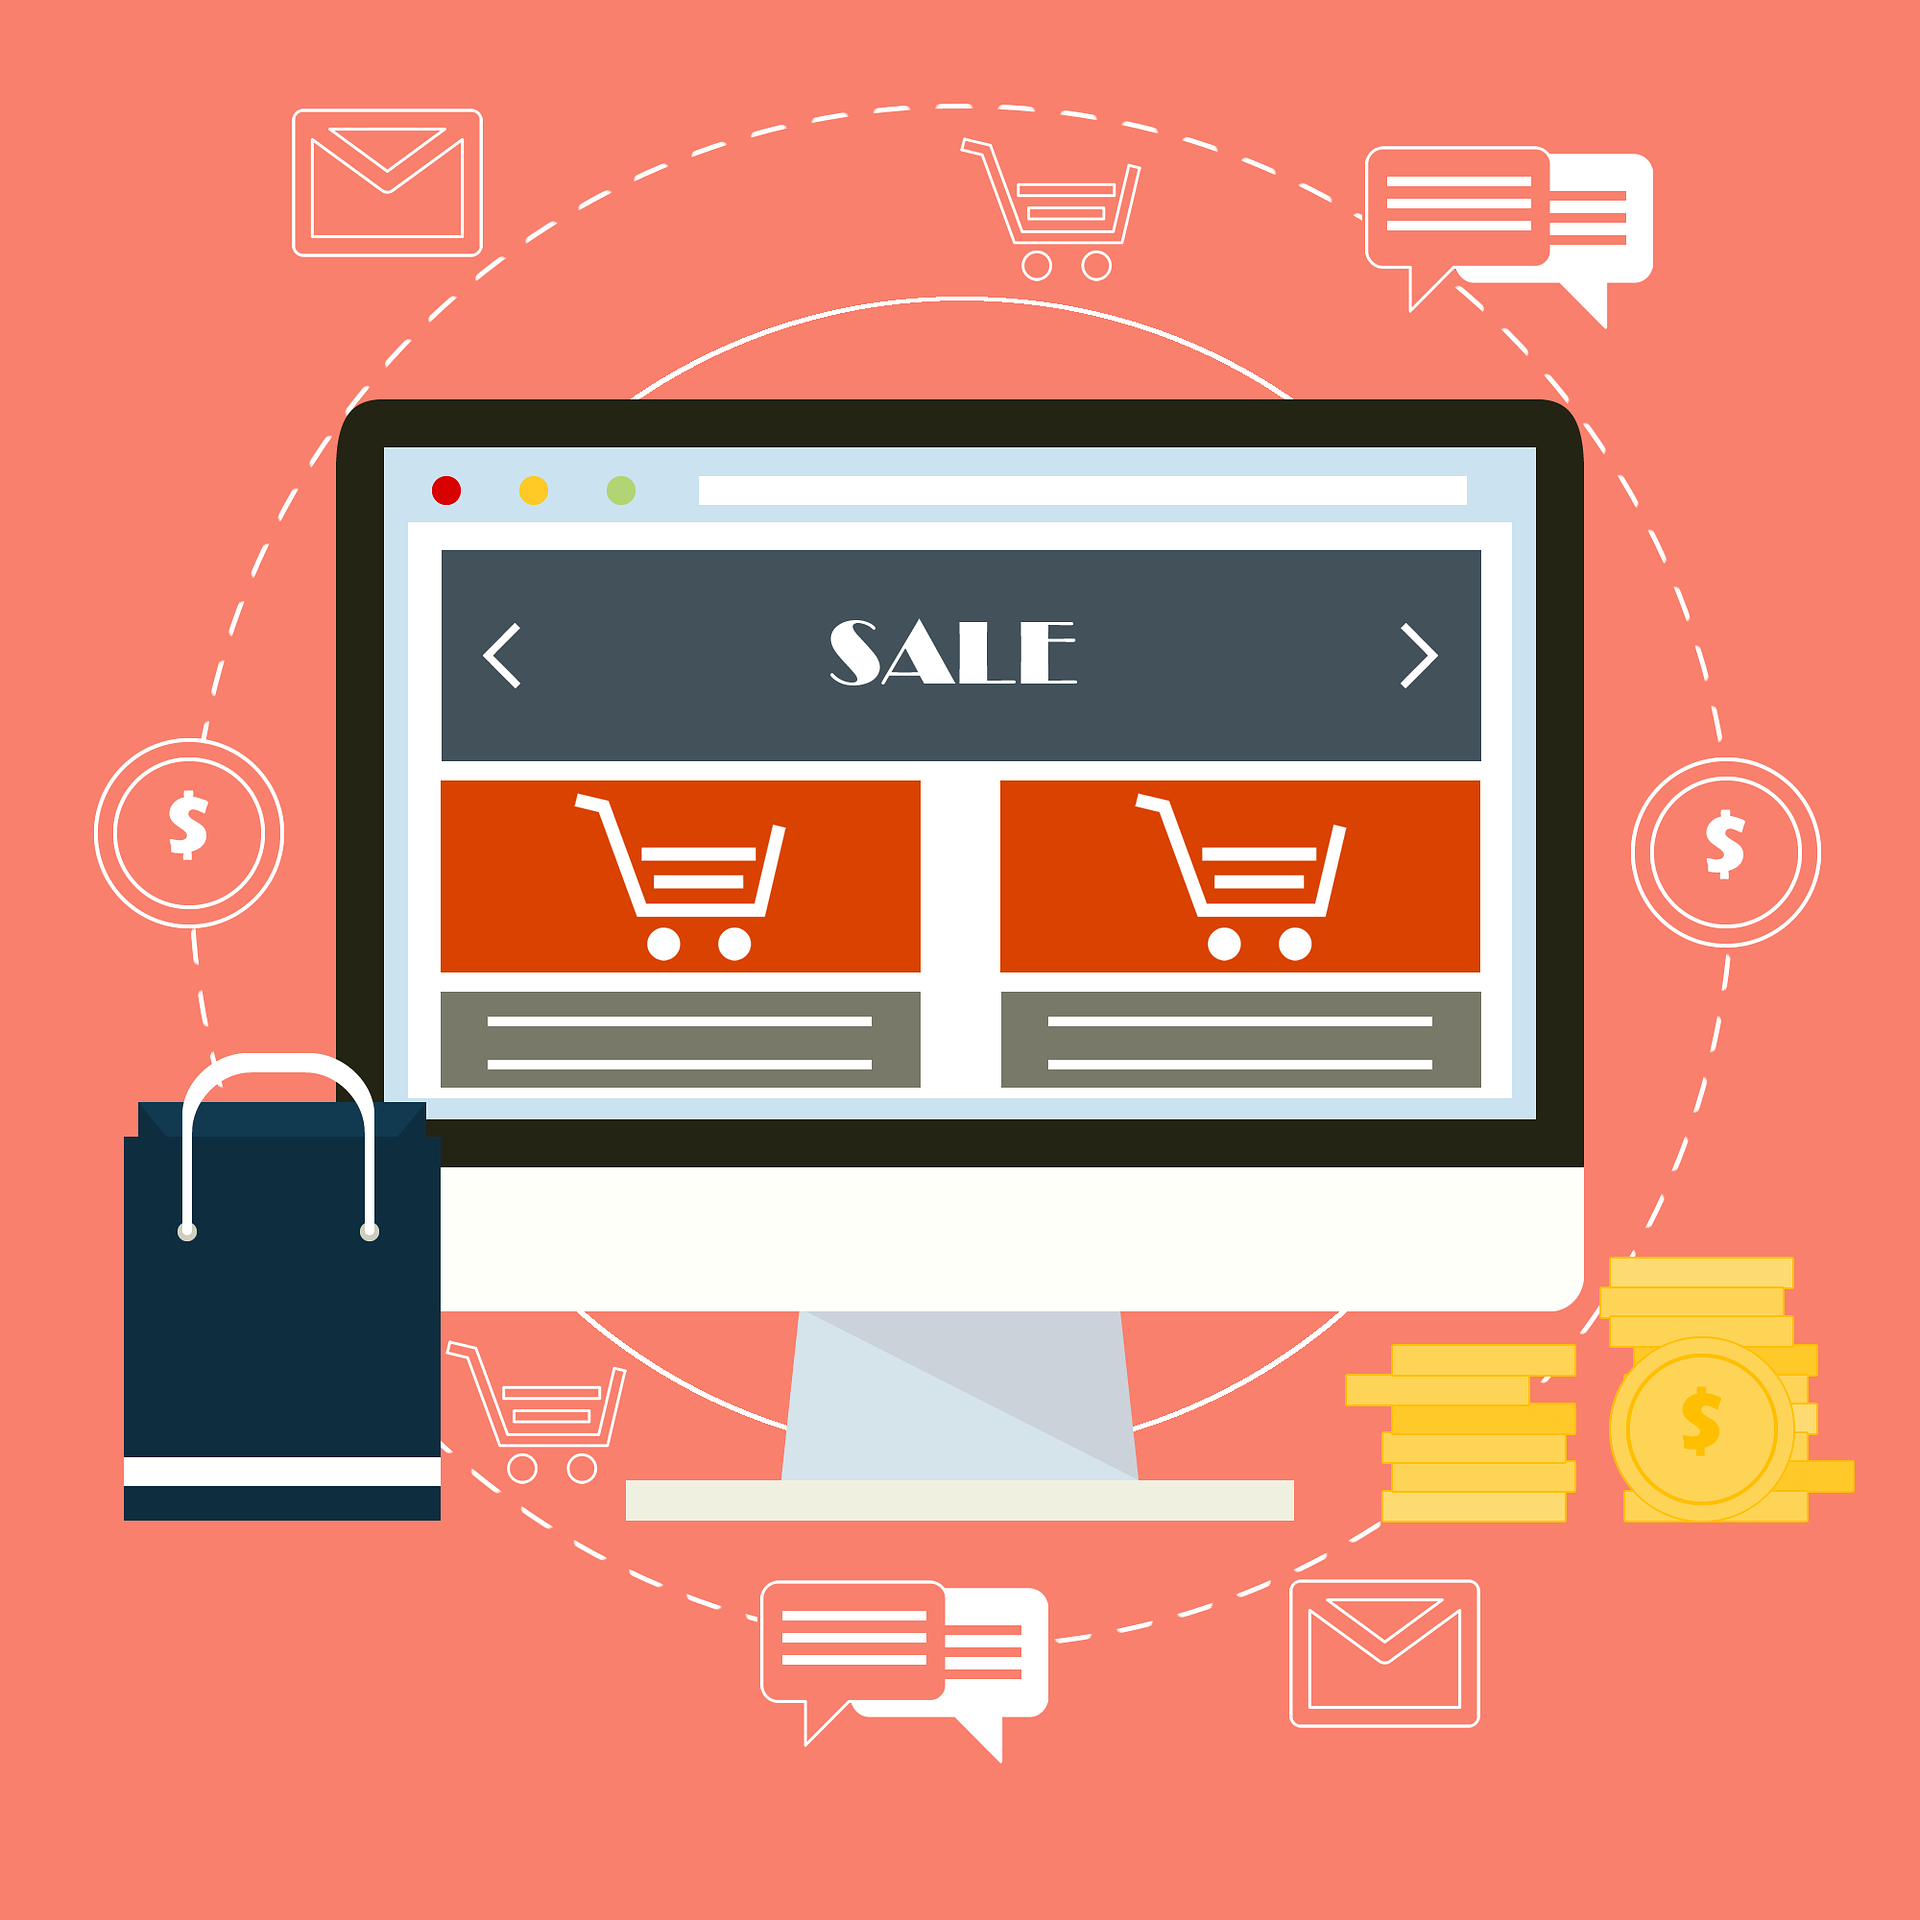 Drupal Commerce - a good alternative to build an online store